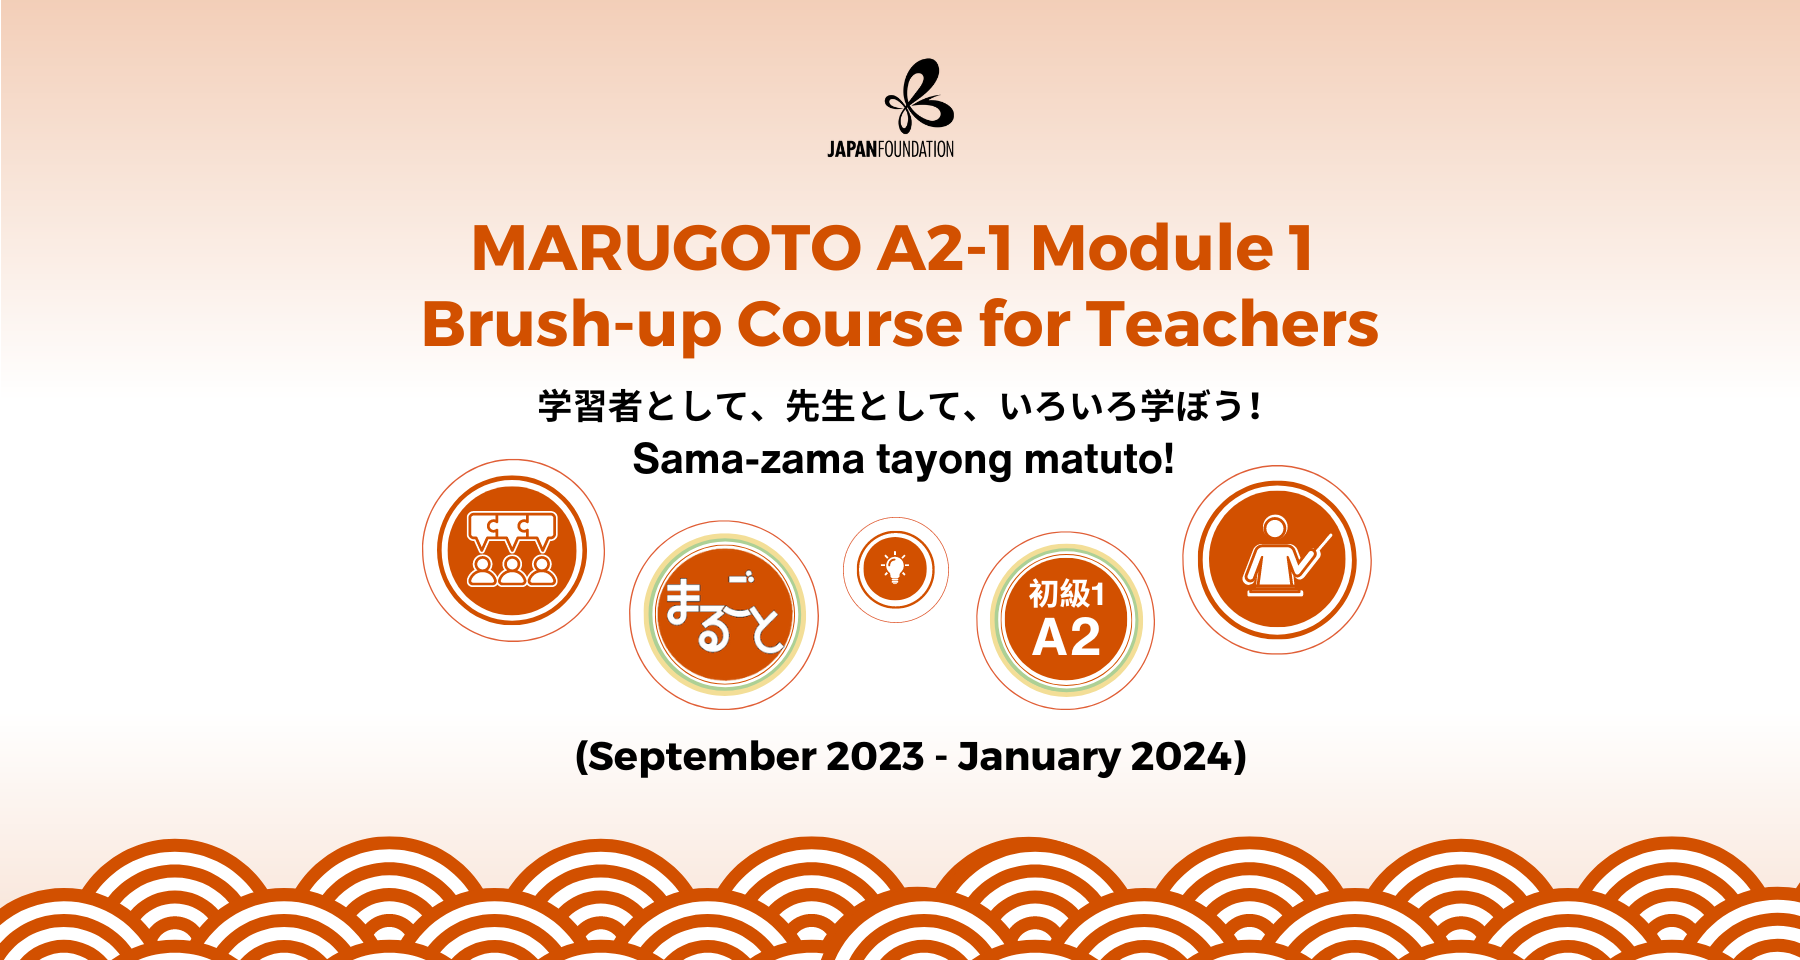 MARUGOTO A2-1 Module 1 Brush-up Course for Teachers